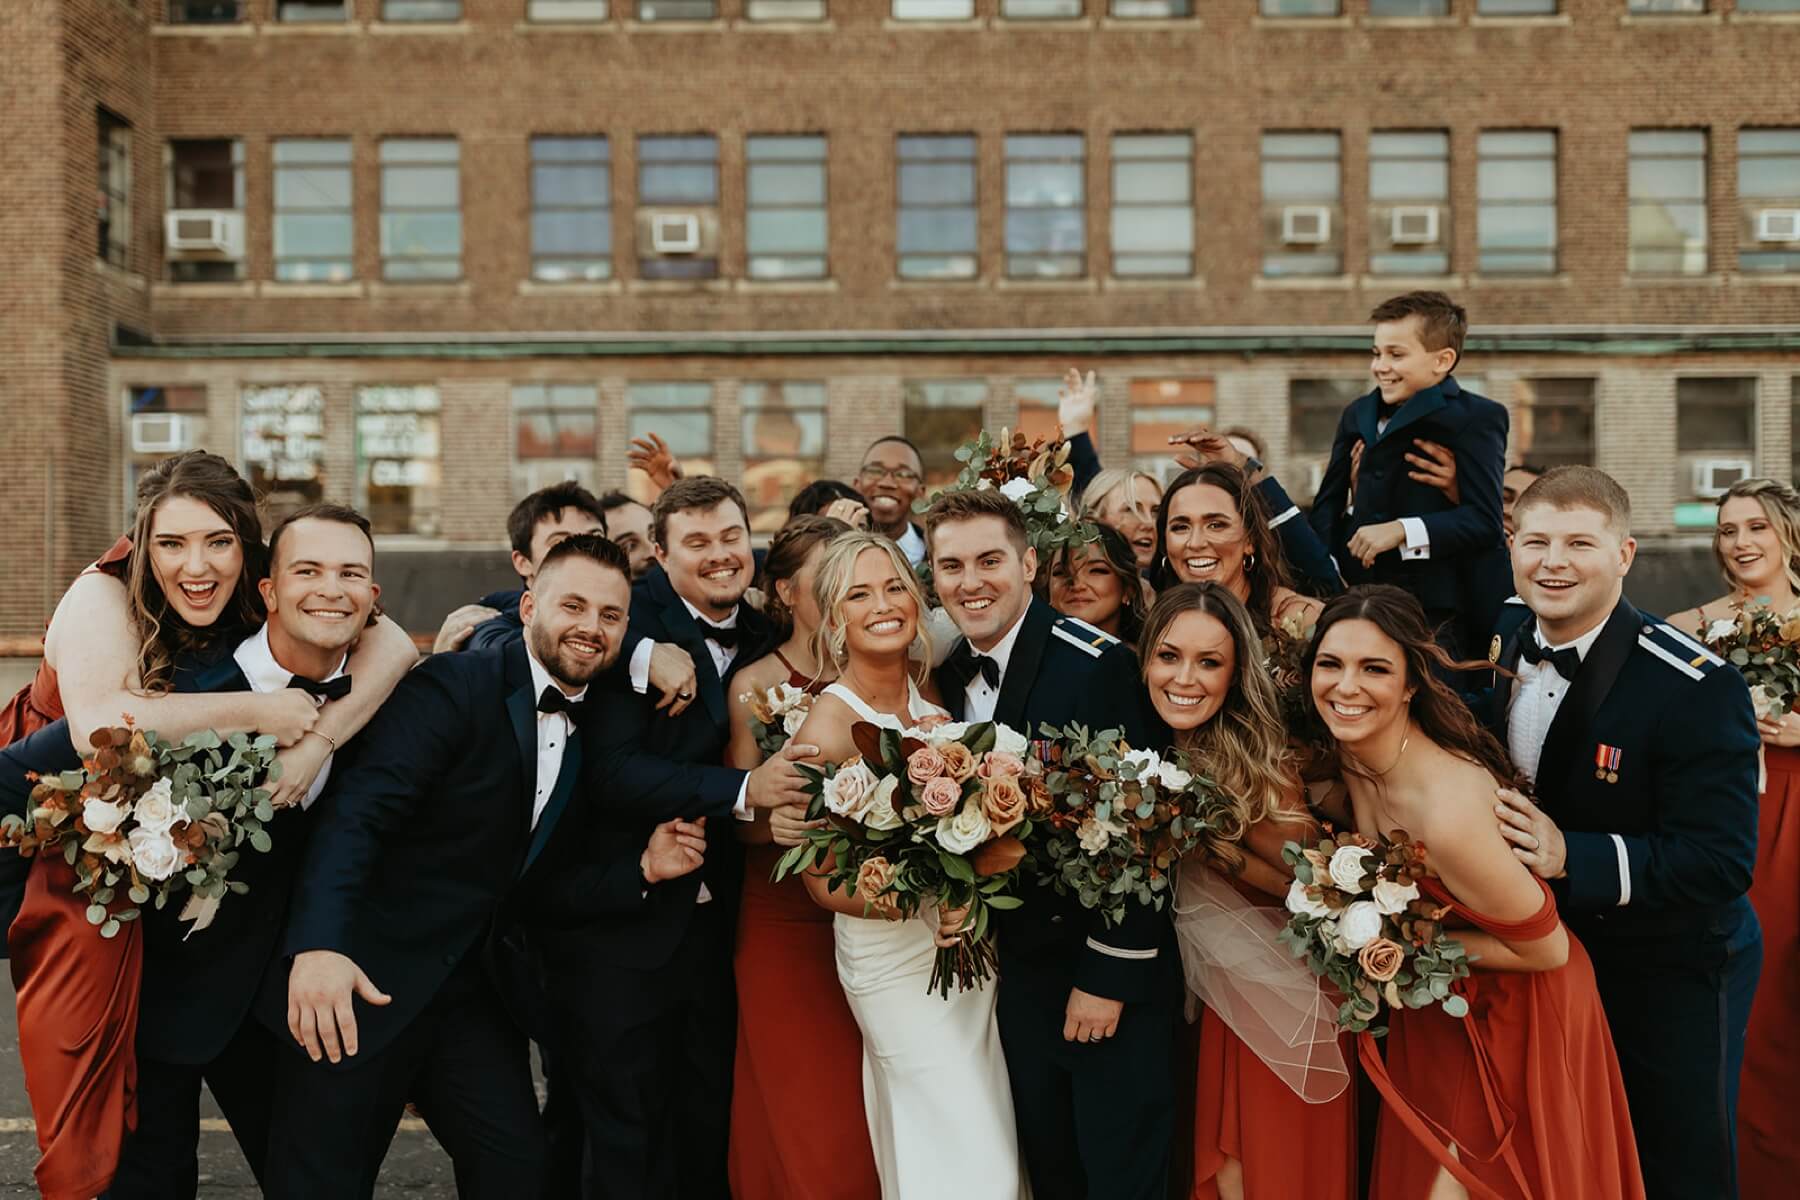 Bride and groom in candid shot with wedding party